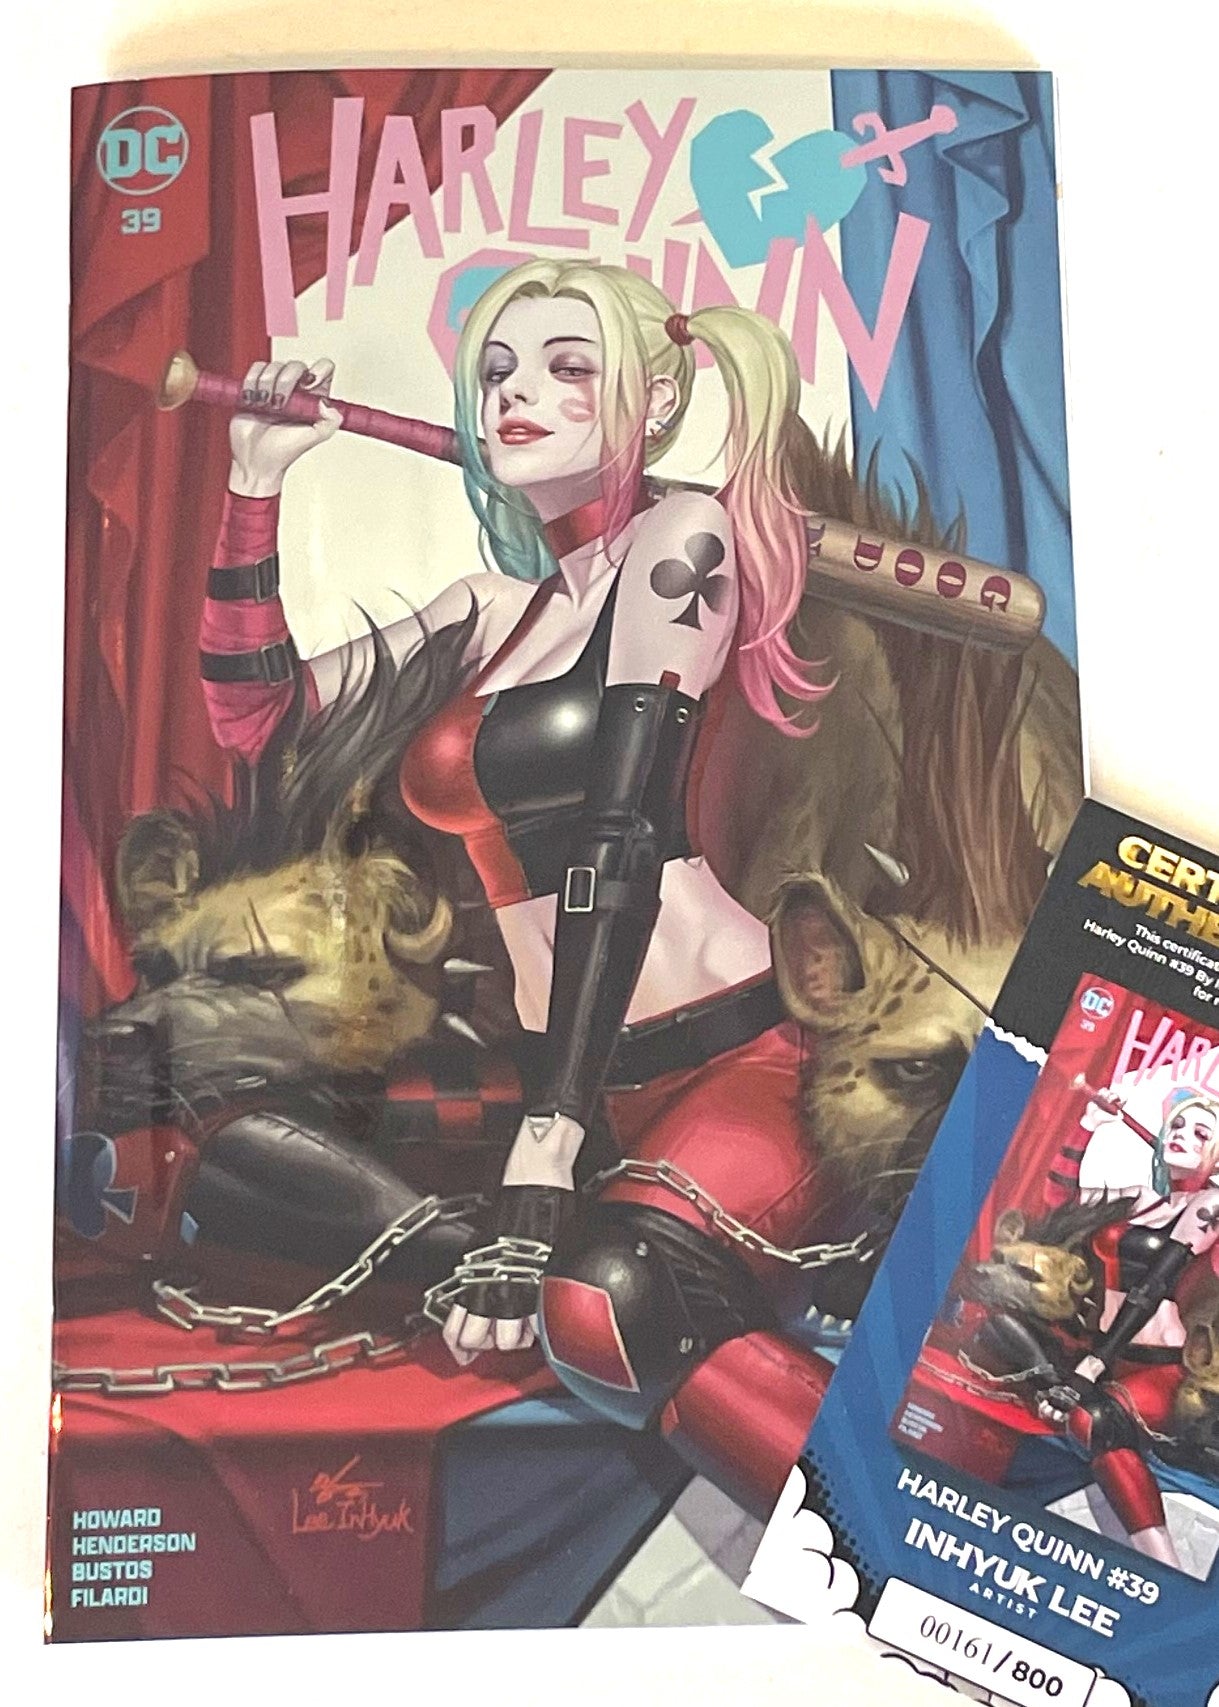 HARLEY QUINN #39 INHYUK LEE EXCL "FOIL" VARIANT LE TO 800 W/ COA